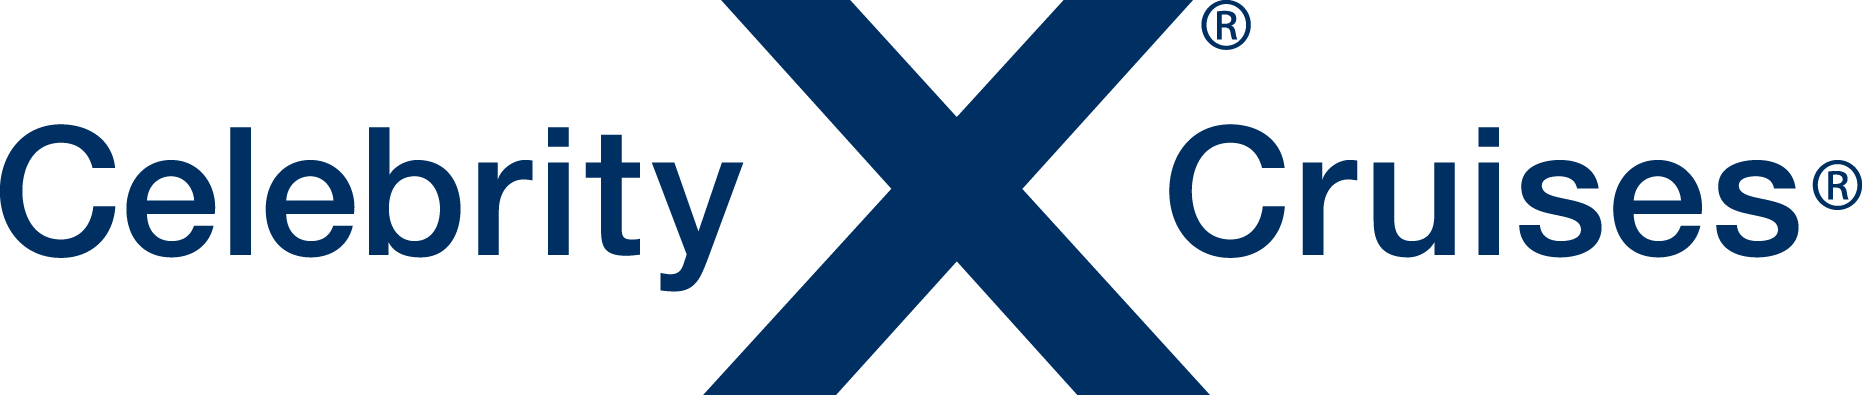 Celebrity Cruises_Blue_PNG.PNG